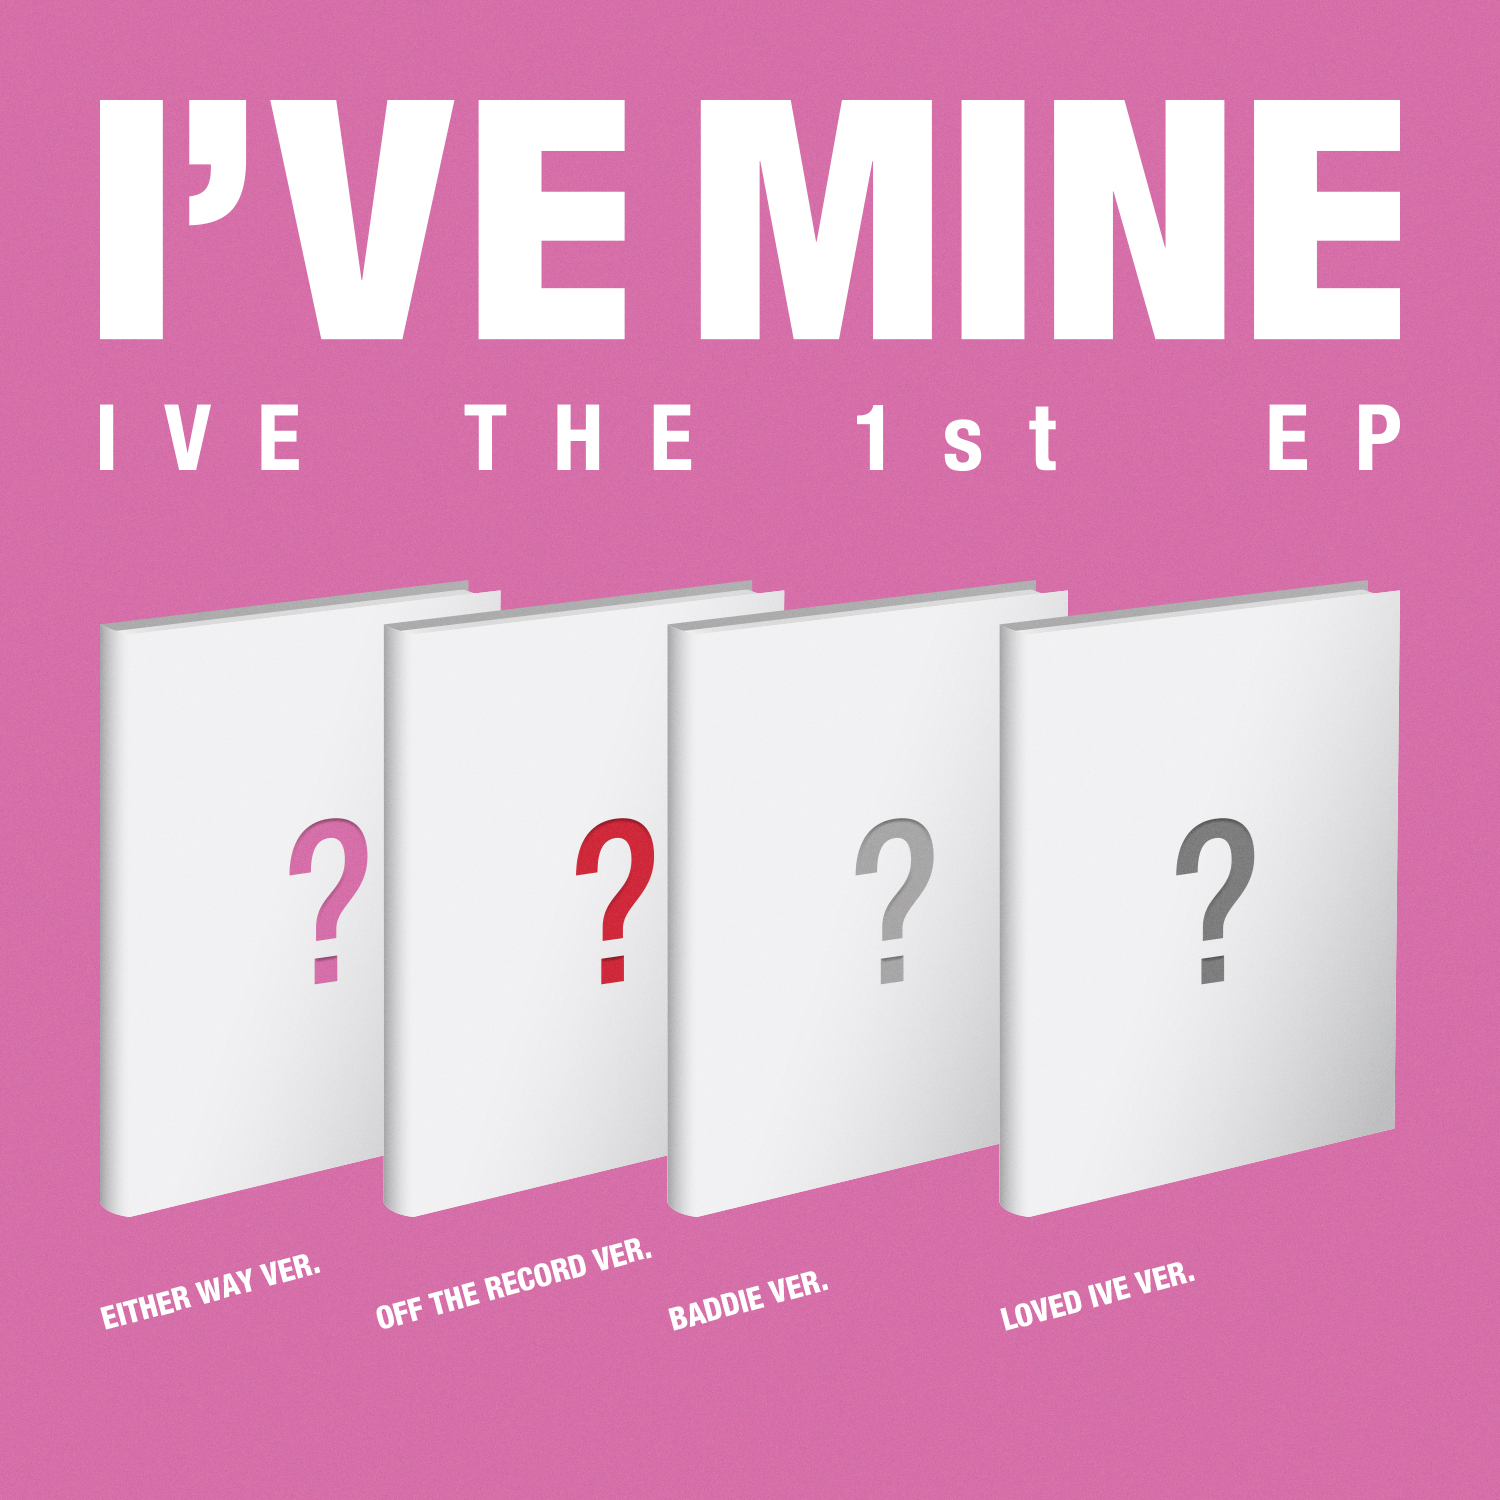 [Random] IVE - IVE THE 1st EP [I'VE MINE] (EITHER WAY ver. / OFF THE RECORD ver. / BADDIE ver. / LOVED IVE ver.)